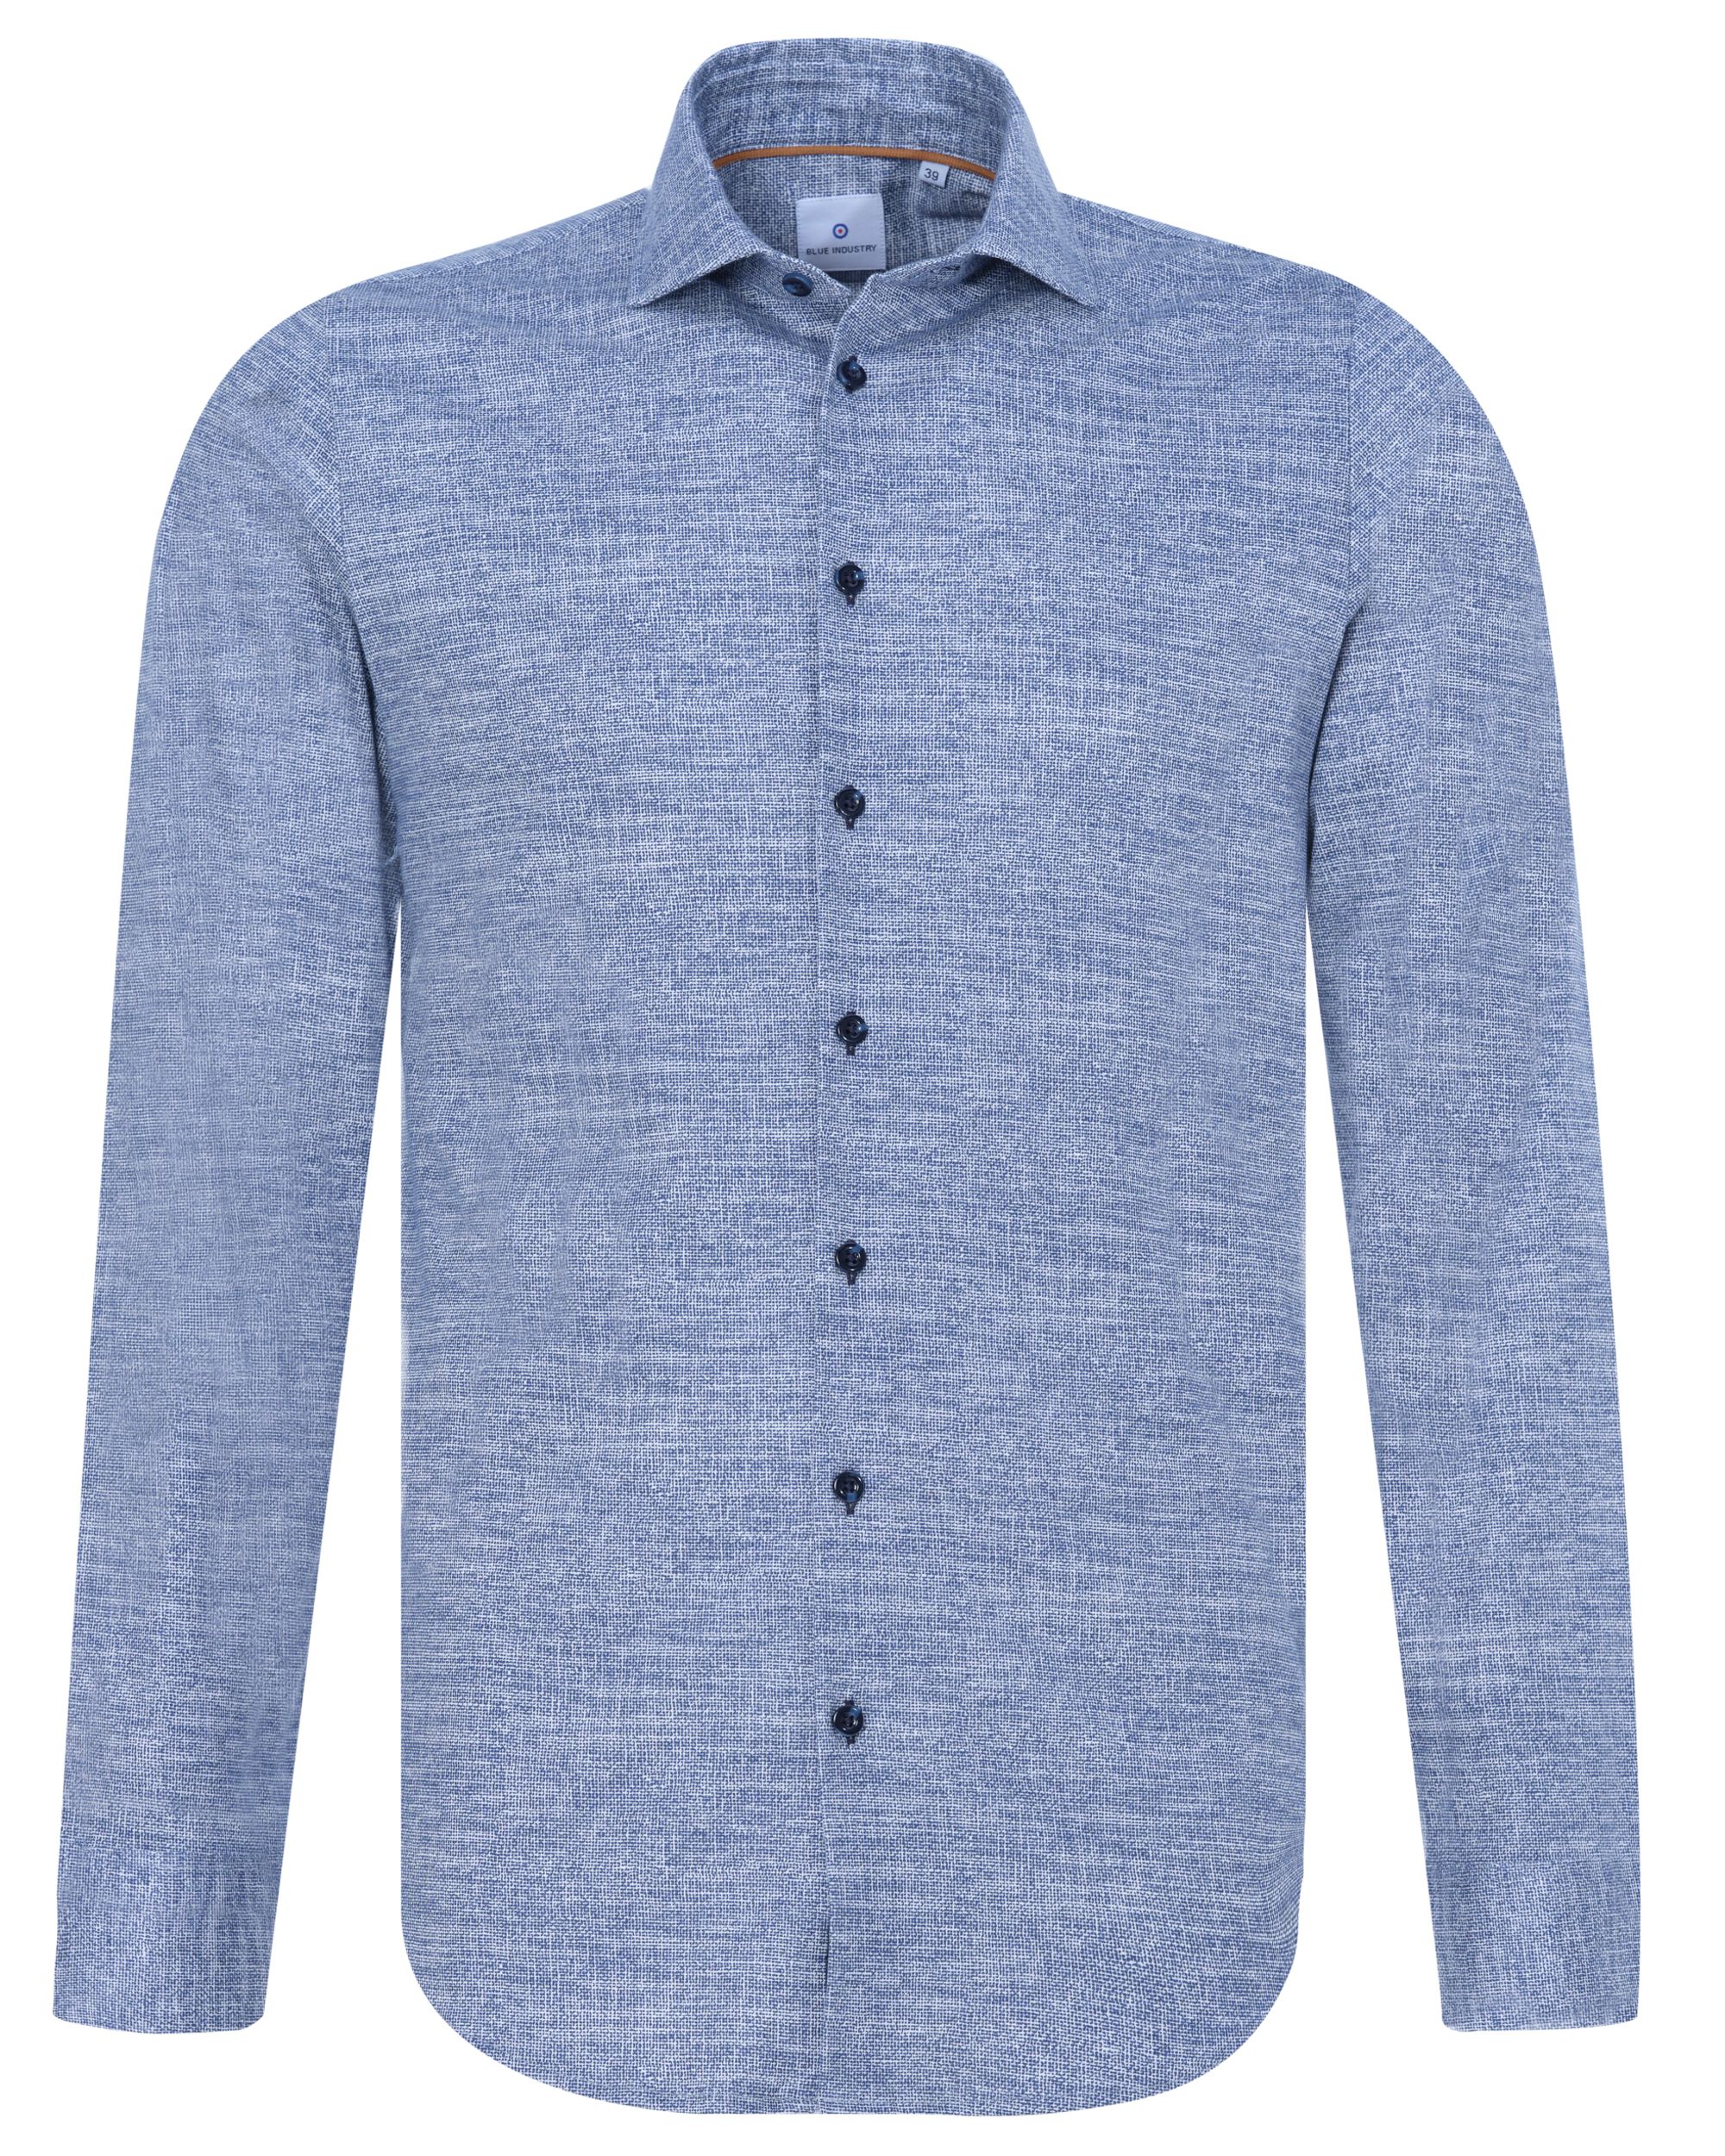 Blue Industry Casual Overhemd LM Blauw 082717-001-37